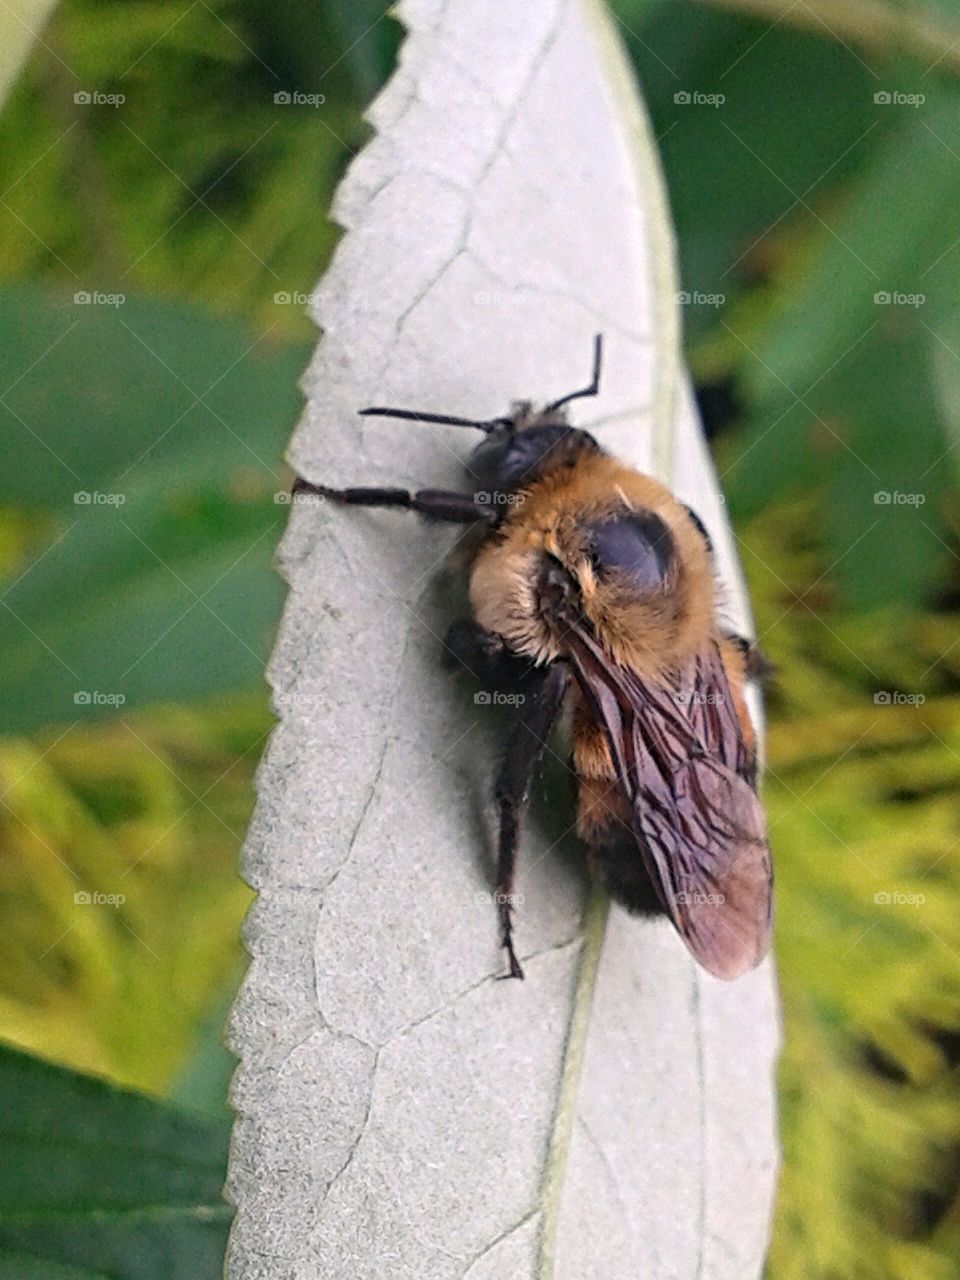 Resting bee. Taking a break from his work.